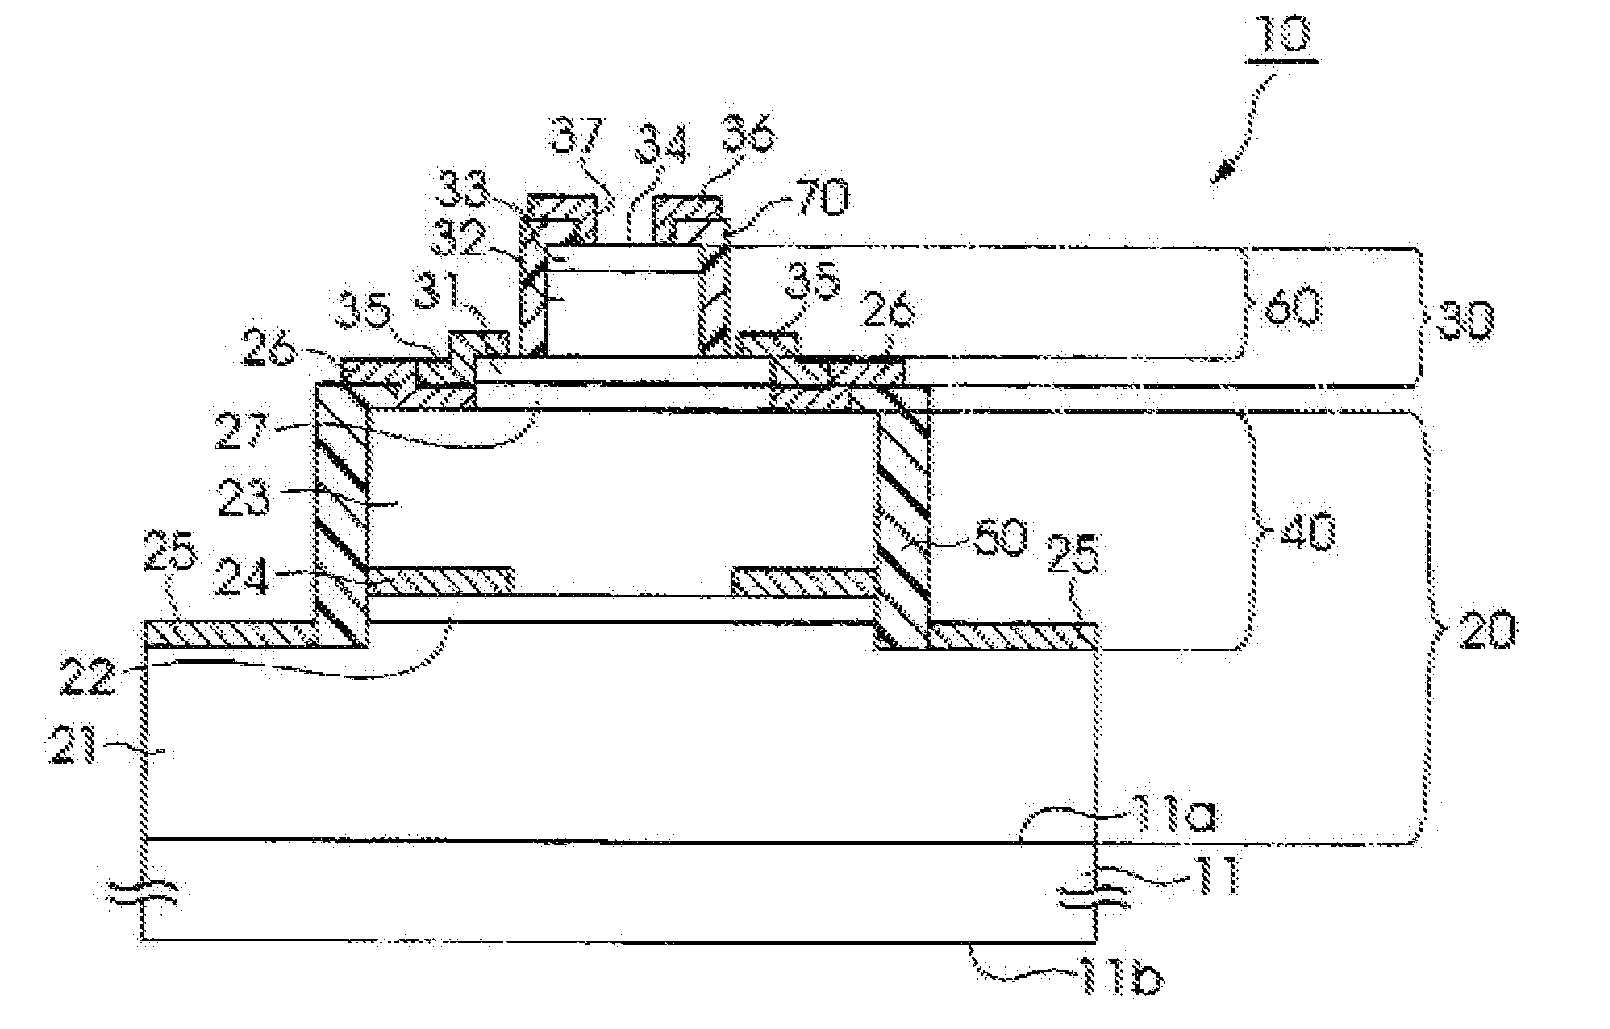 Optical element and its manufacturing method